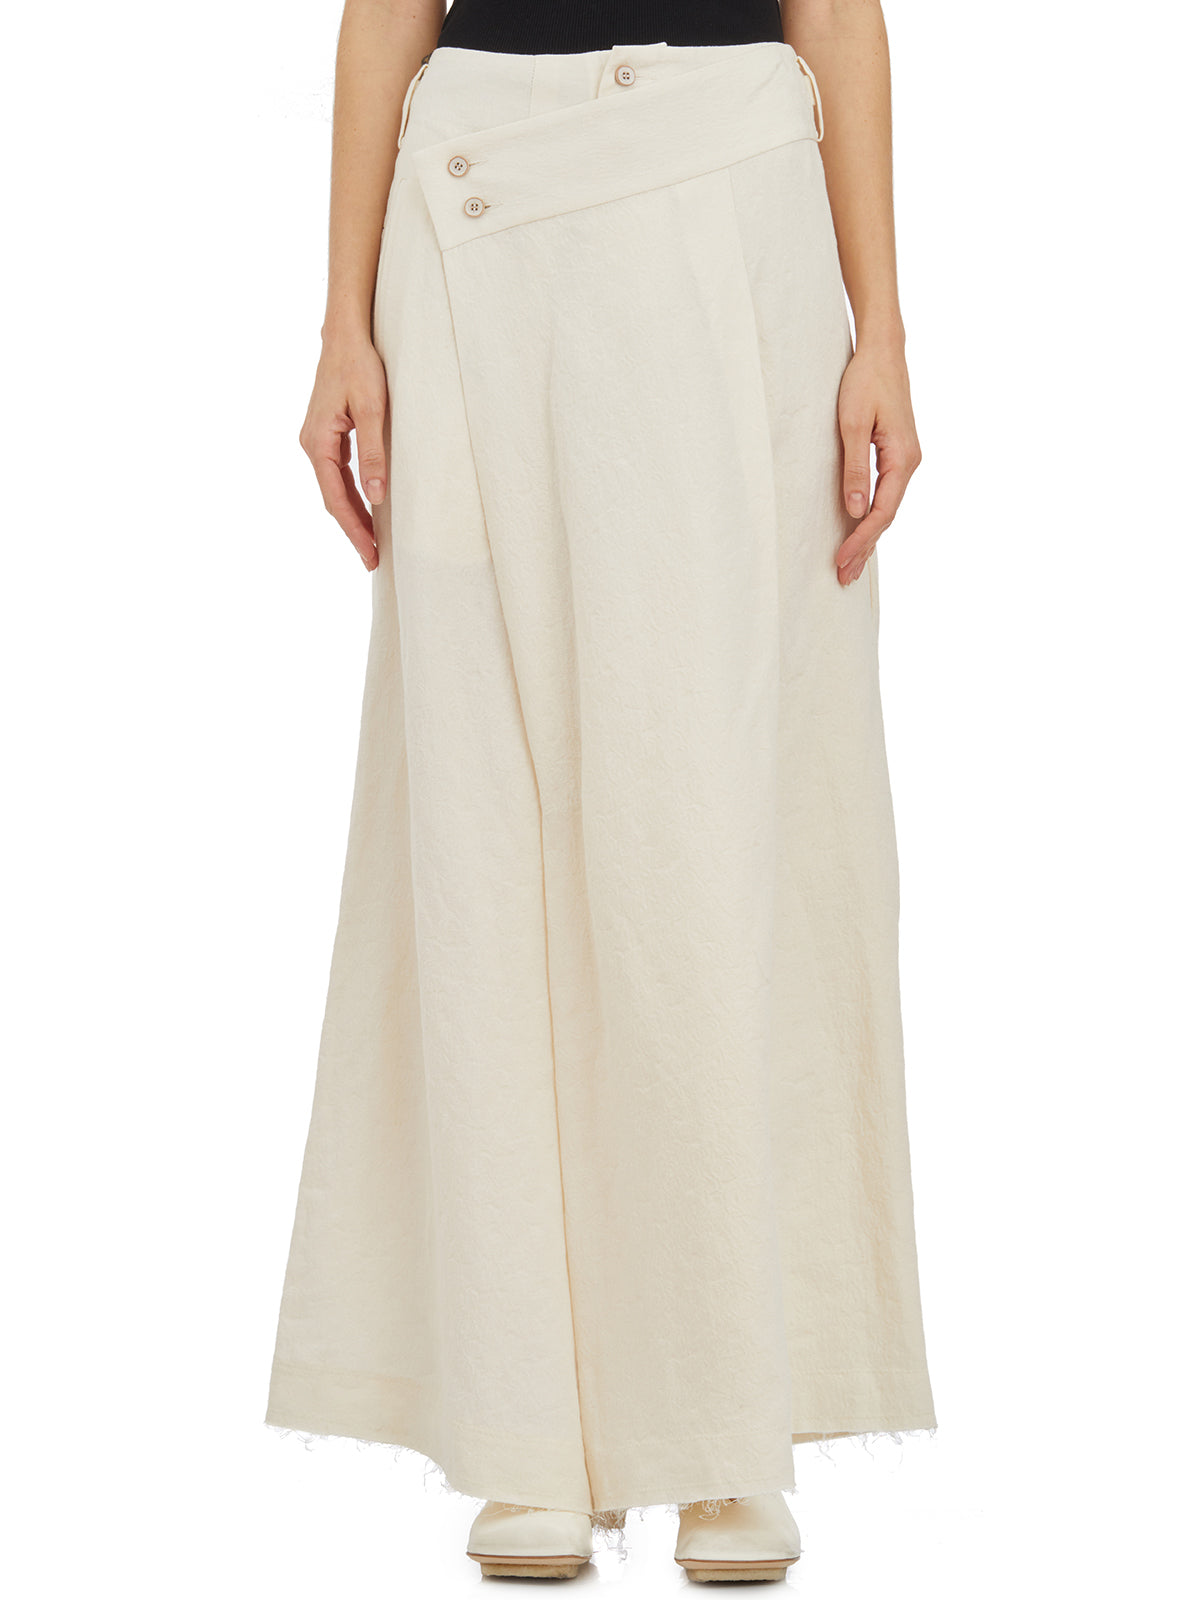 Floral Wide-Leg Trousers for Women in White